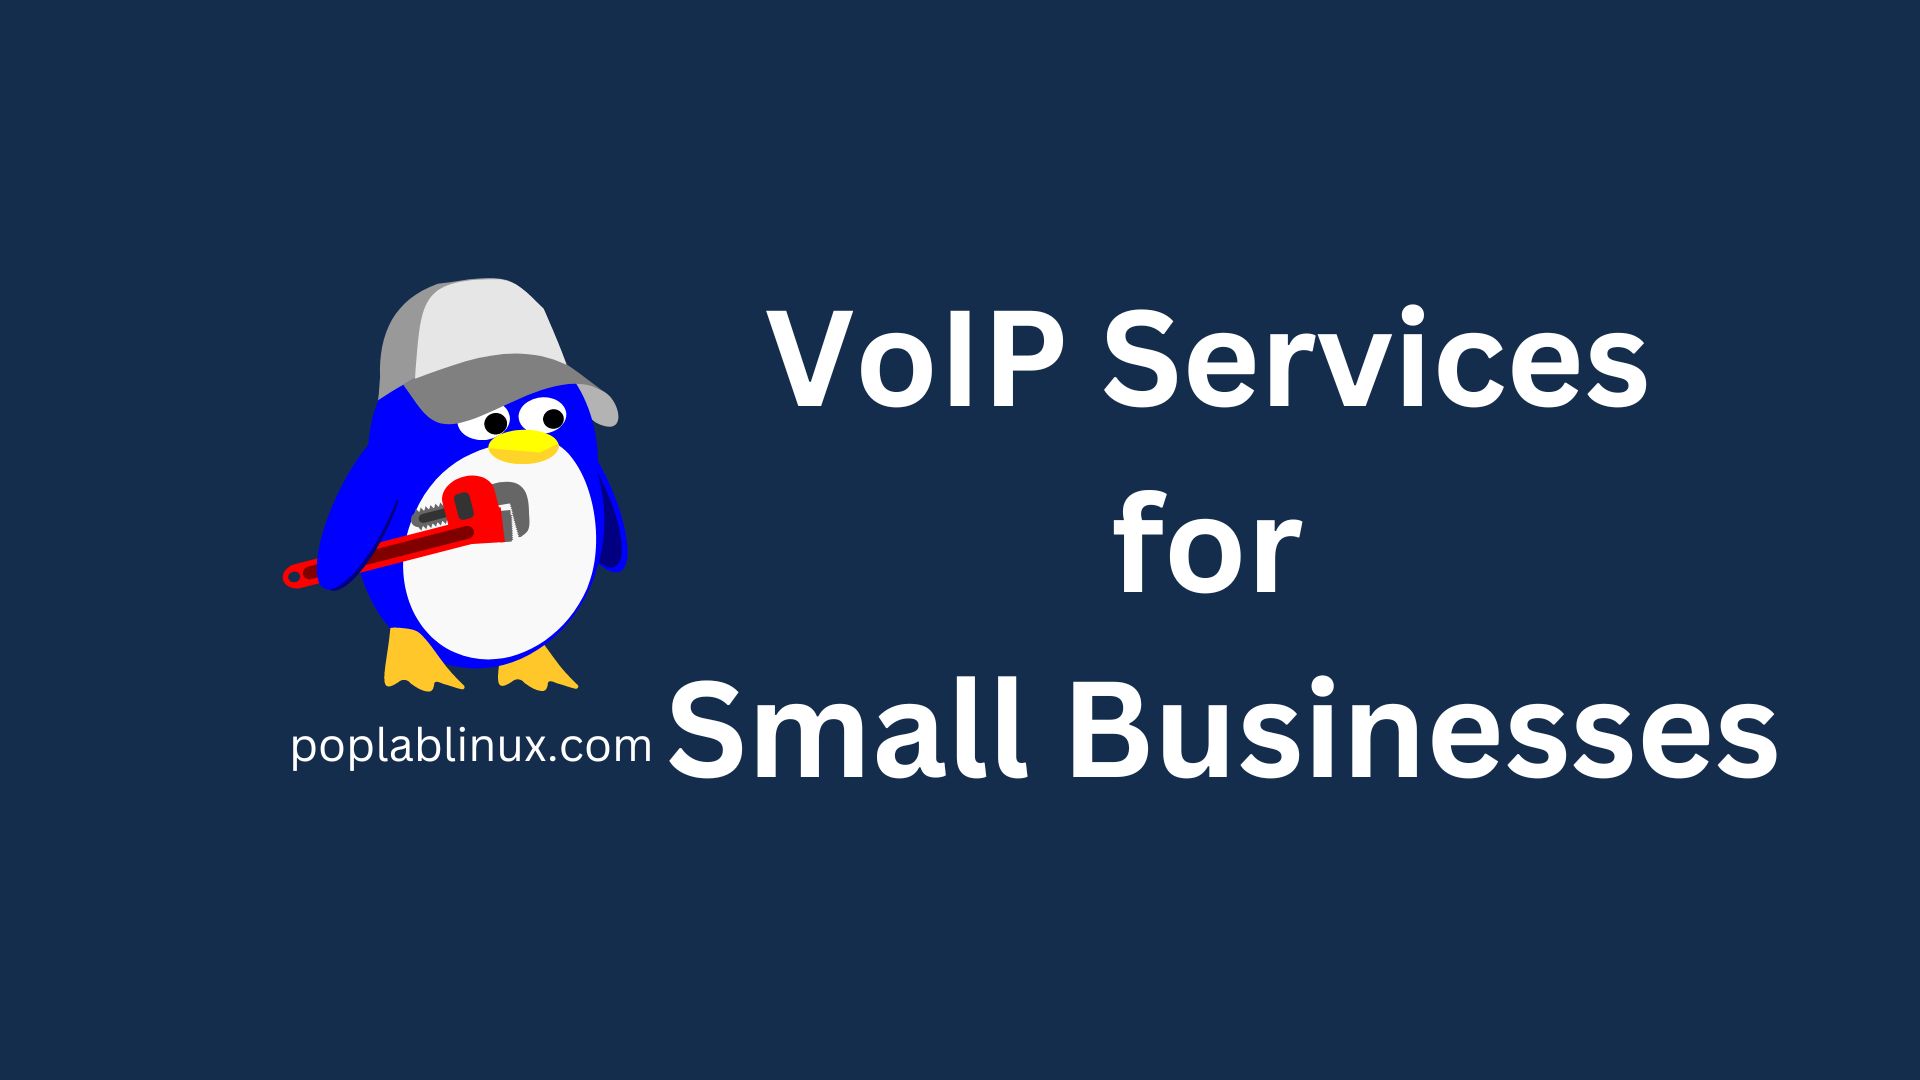 VoIP Services for Small Businesses